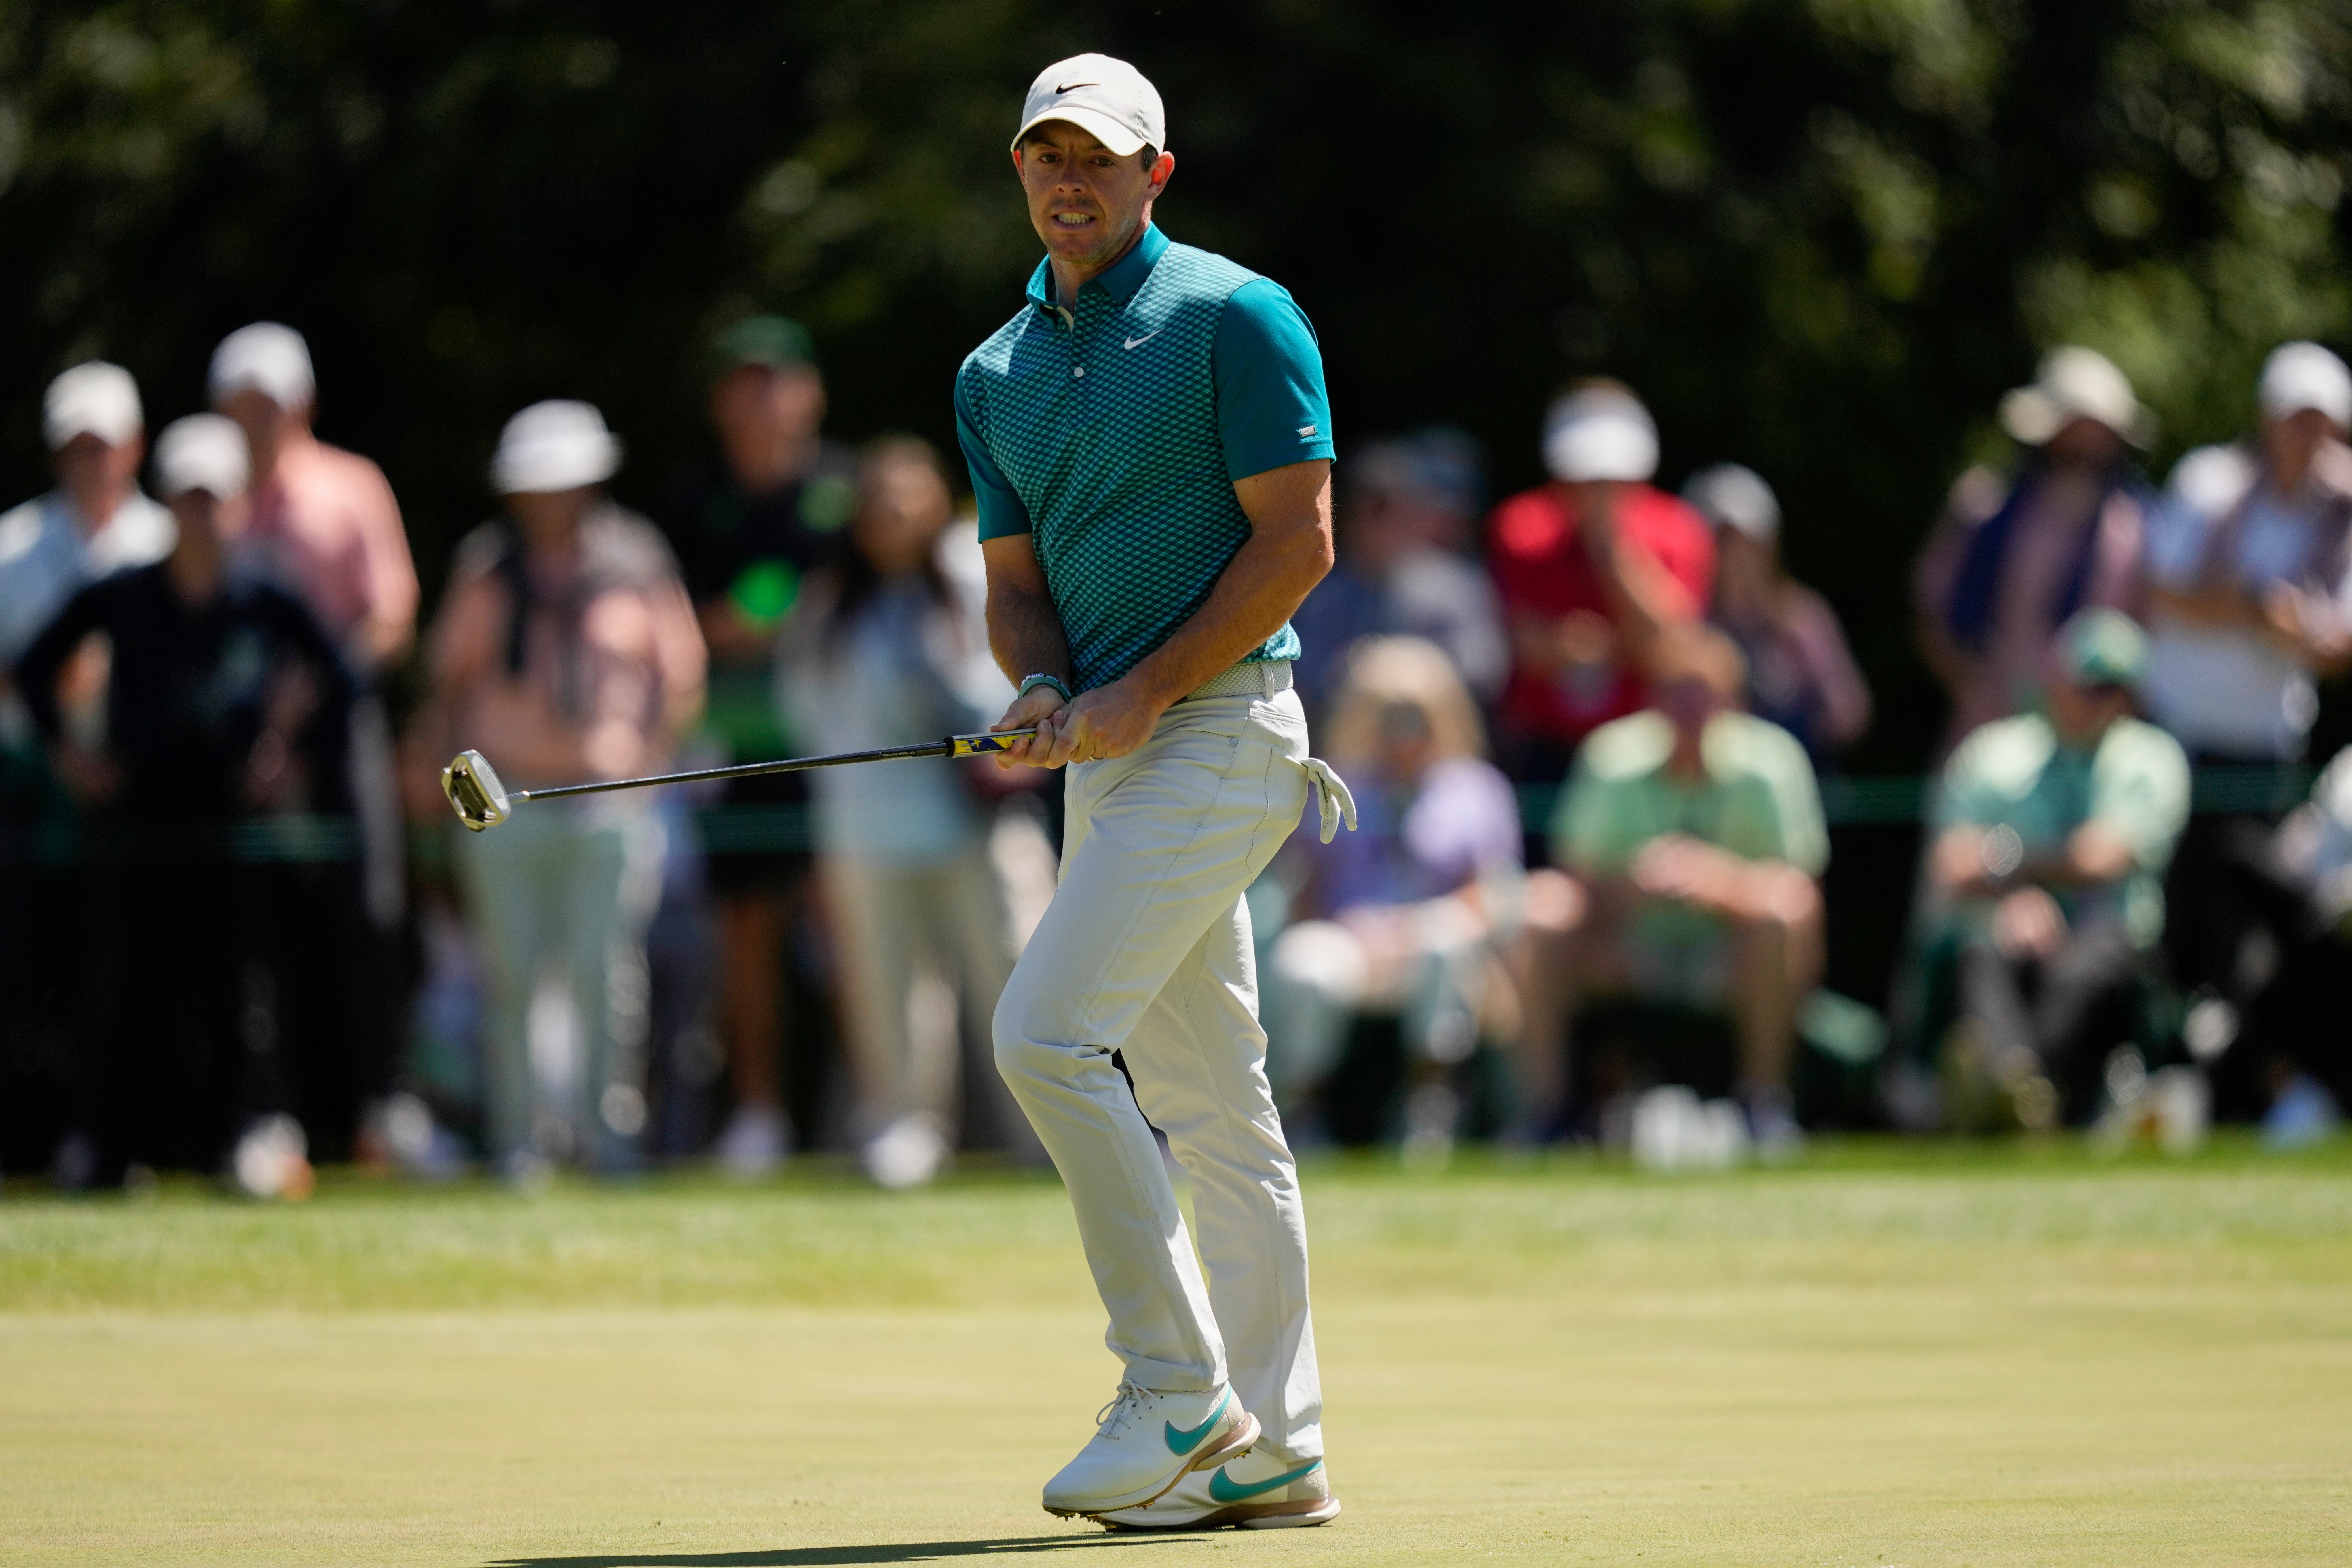 Rory McIlroy produced a brilliant eight-under-par final round to finish second at the Masters (Matt Slocum/AP)